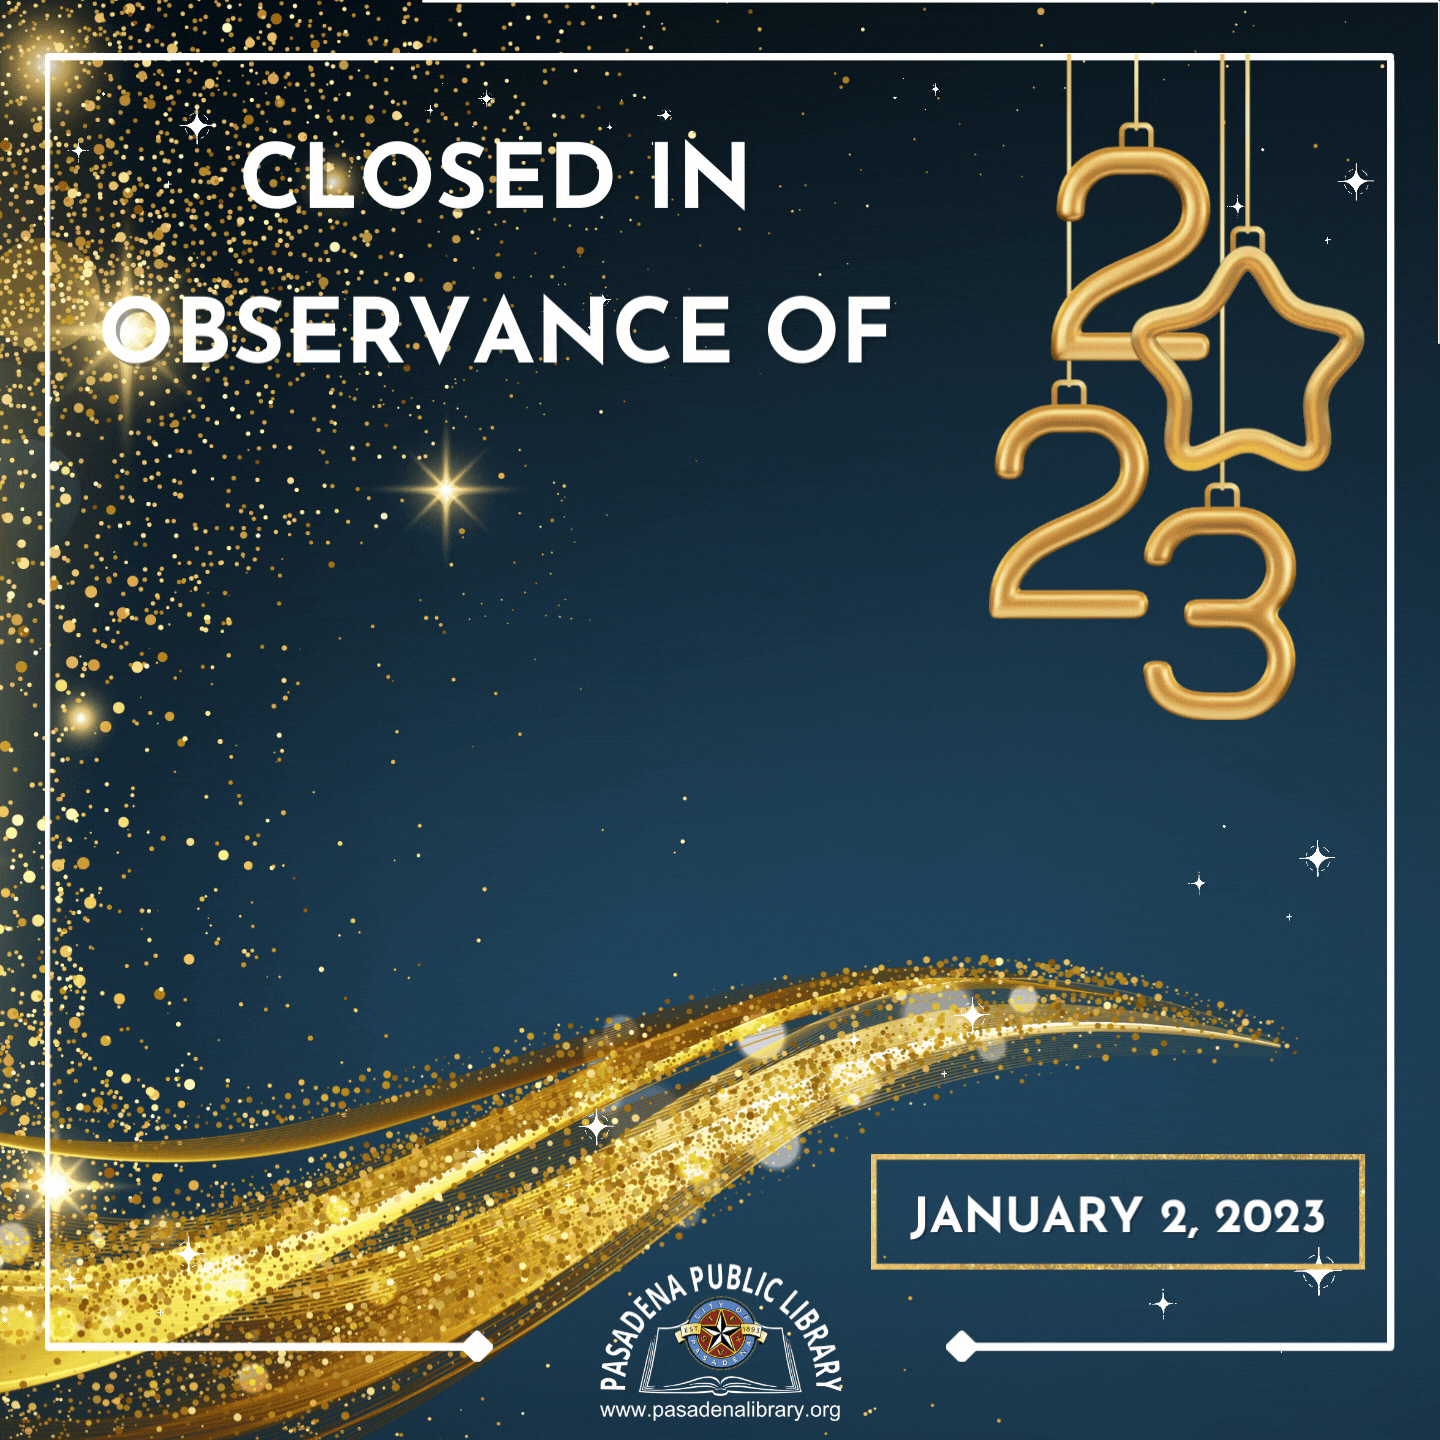 Closed in Observance of the New Year